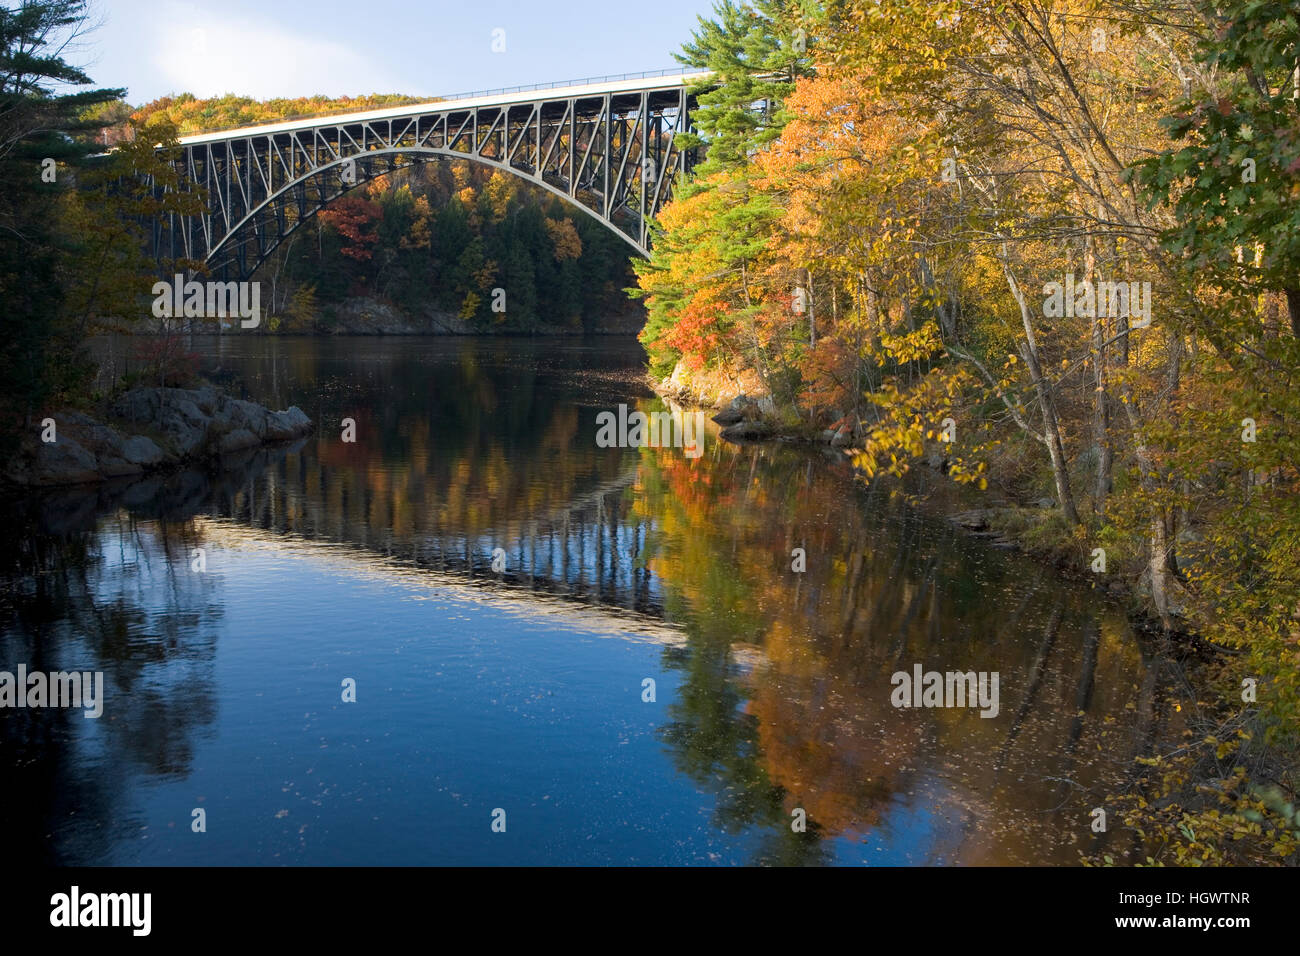 The French King Bridge spans the Connecticut River in Erving, Massachusetts.  Route 2 - Mohawk Highway. Fall.  Confluence of Millers River. Stock Photo